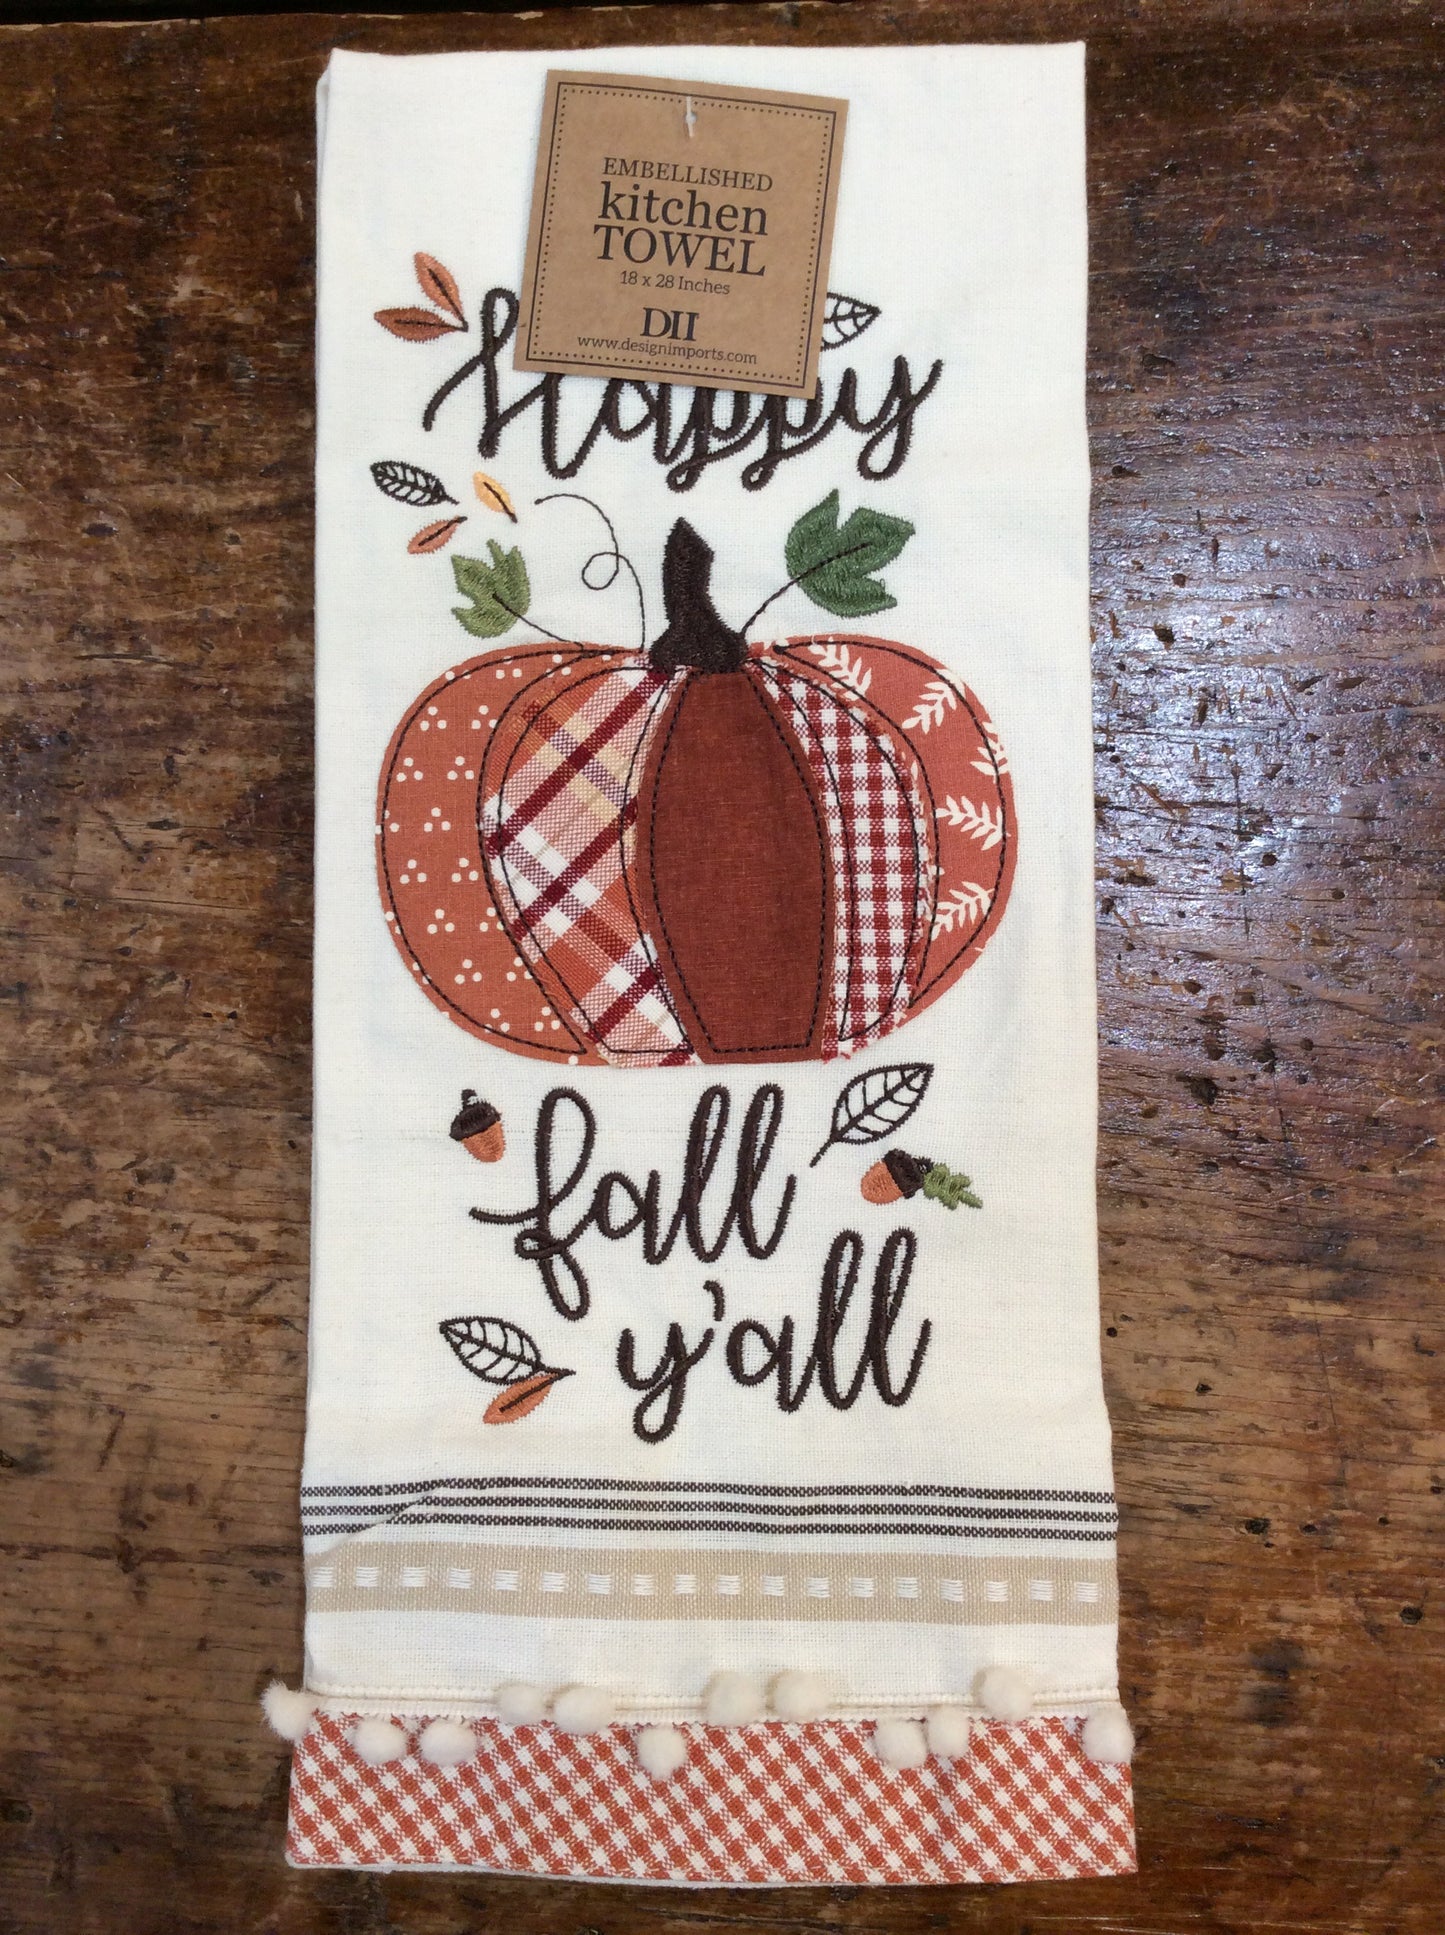 Happy Fall Y'all Embellished Kitchen Towel - DII